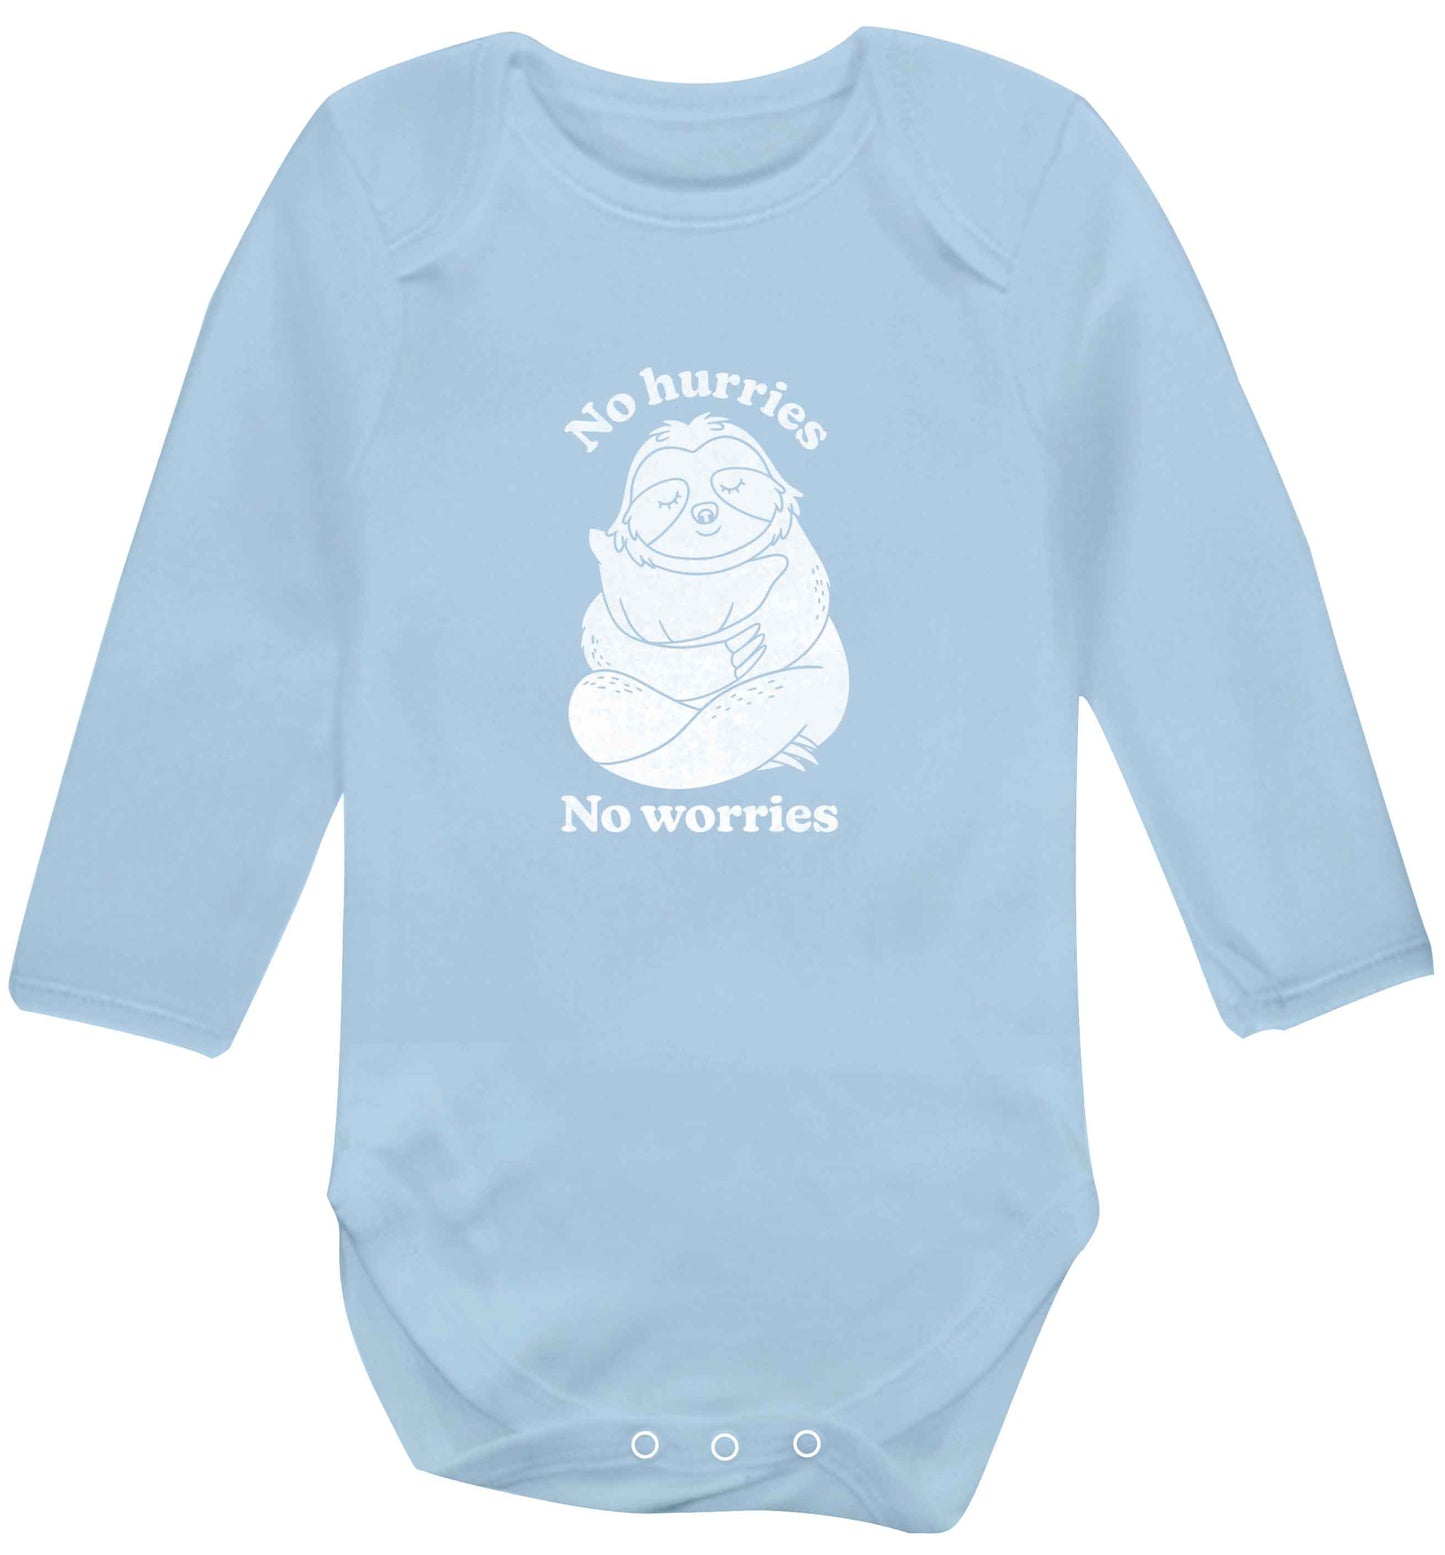 No hurries no worries baby vest long sleeved pale blue 6-12 months